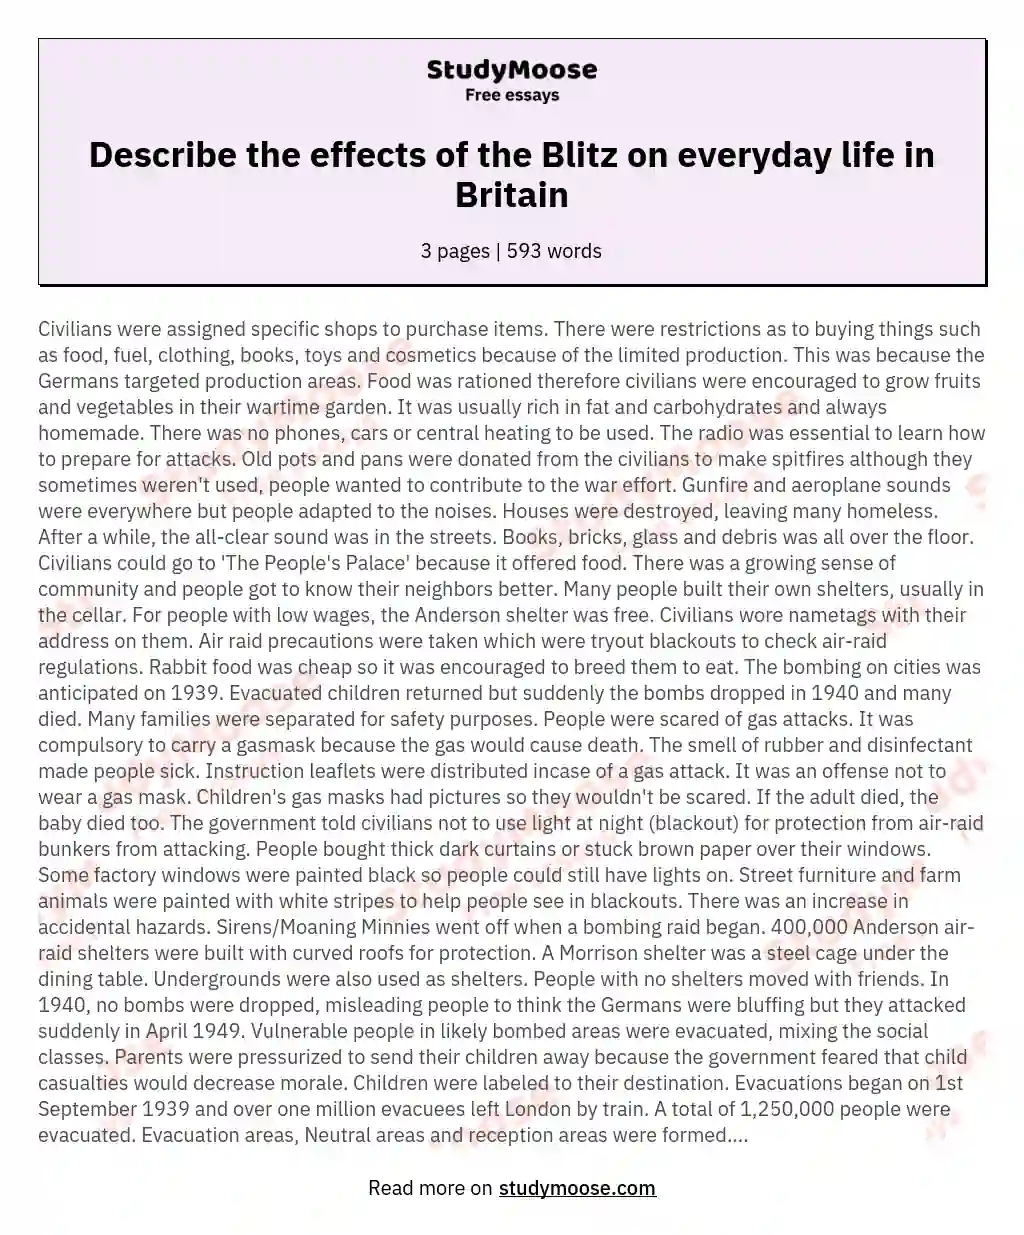 Describe the effects of the Blitz on everyday life in Britain essay